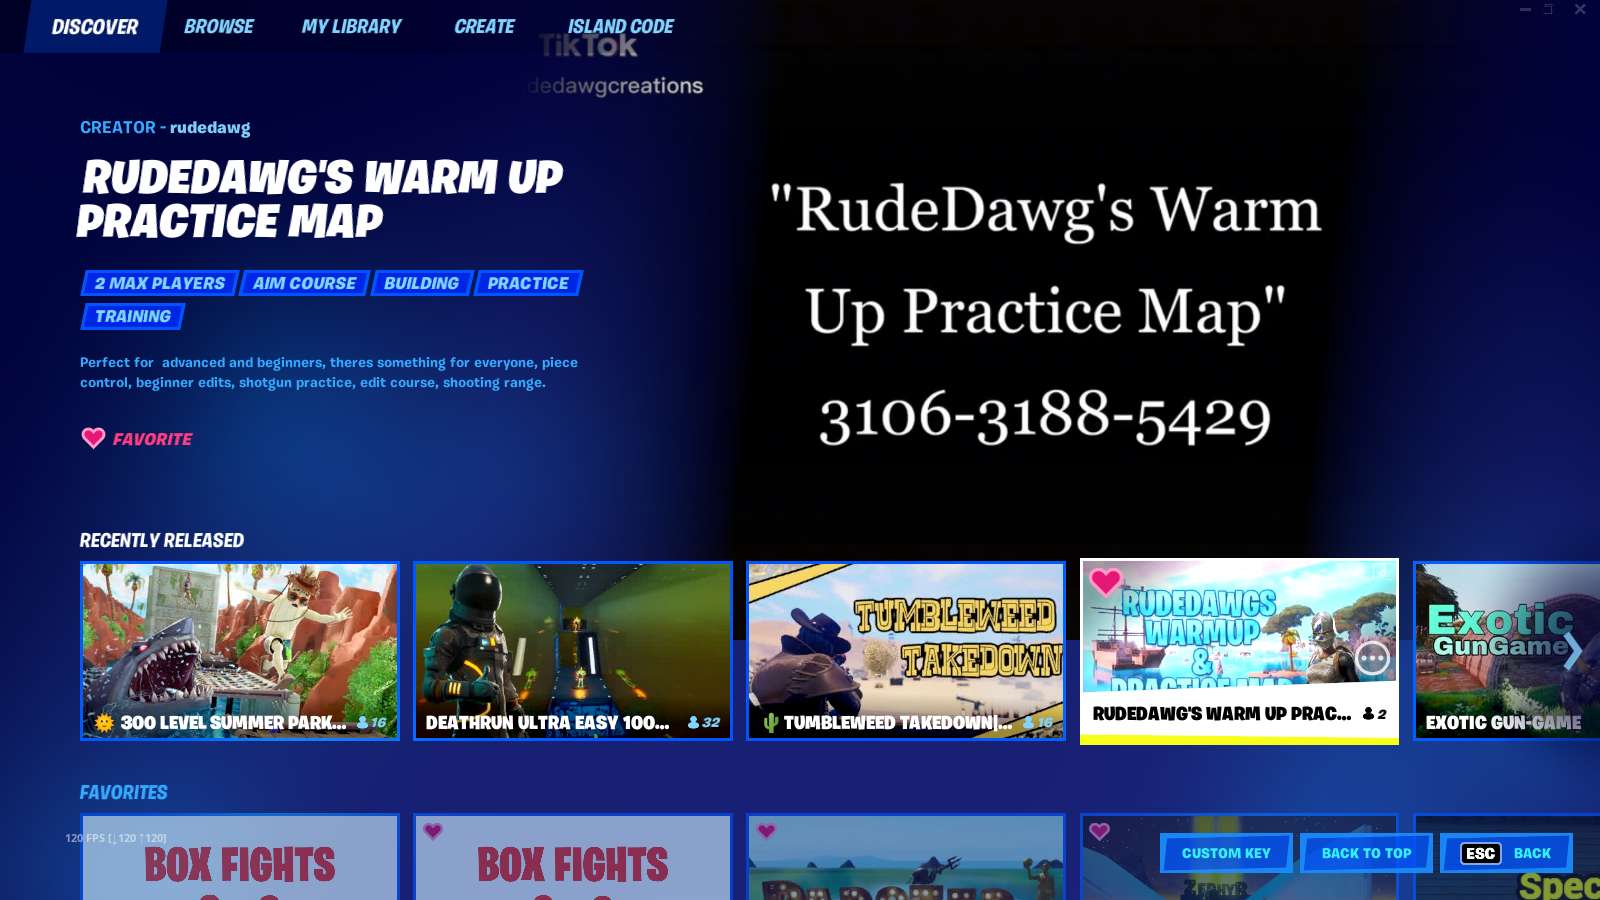 RUDEDAWG'S WARM UP image 2